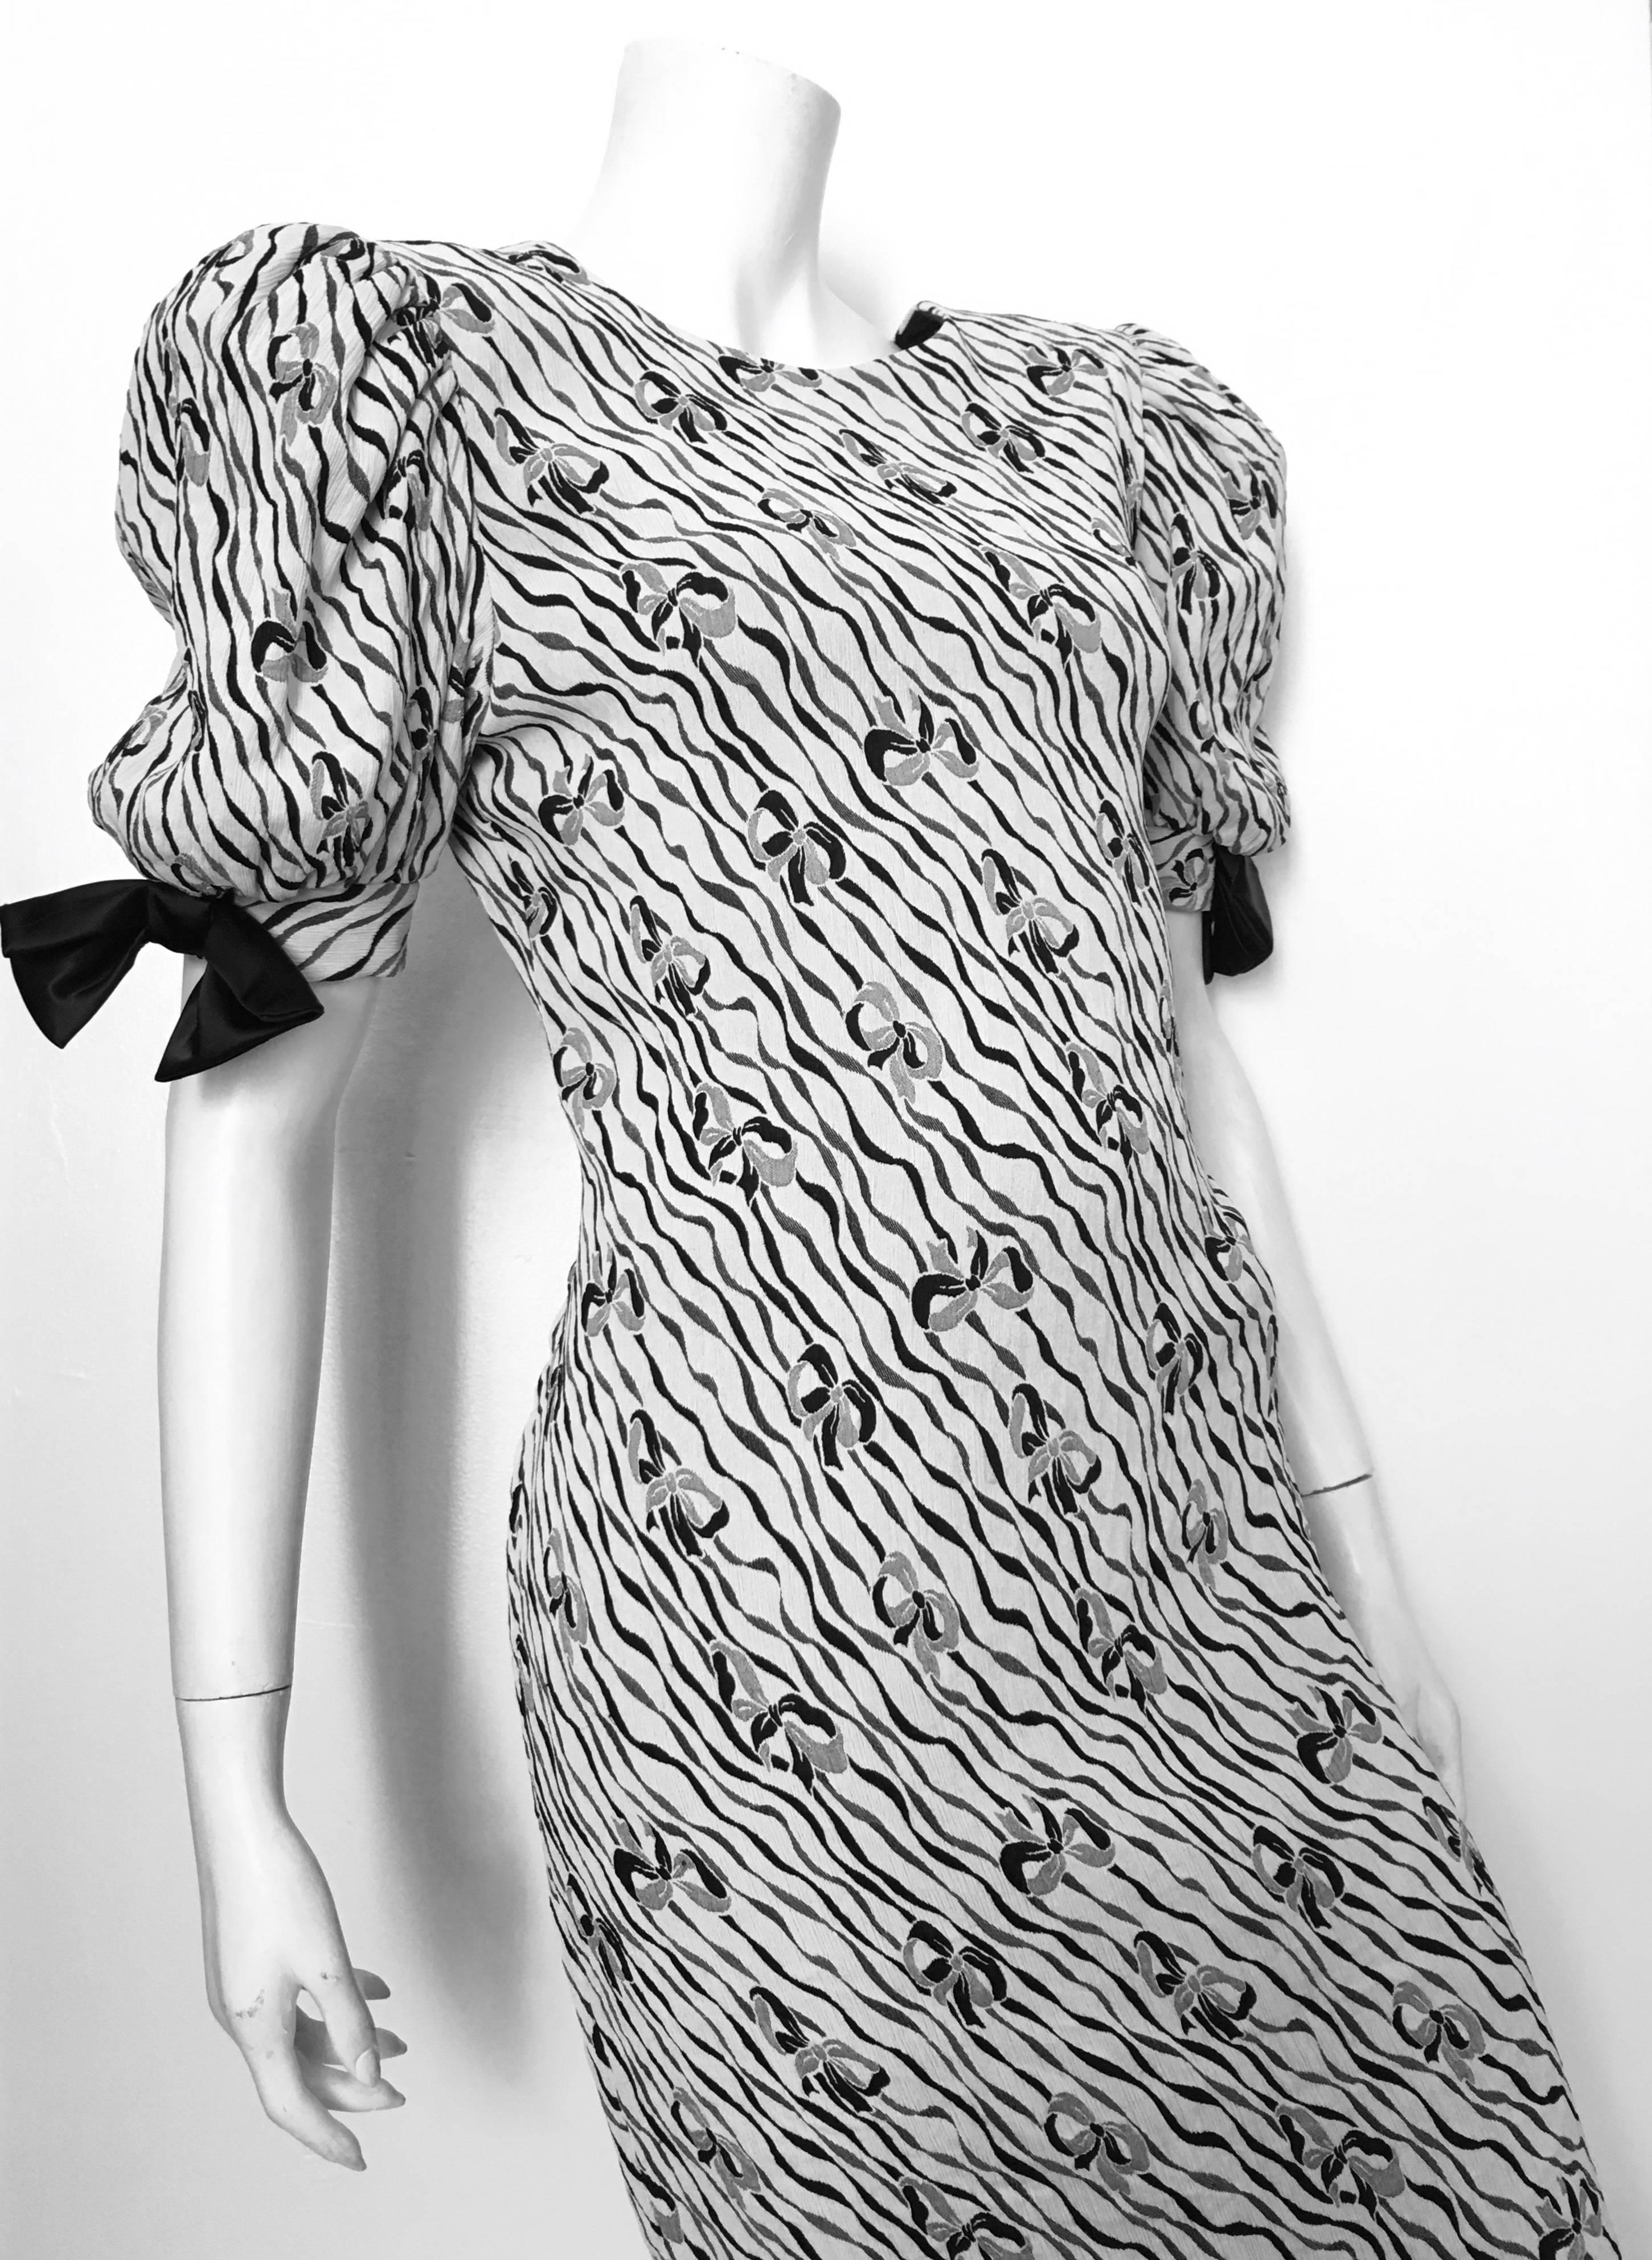 Pierre Cardin 1980s white background with black & grey squiggle lines and bow pattern stretch evening dress is labeled size 10. Ladies please grab your tape measure so you can measure your bust, waist, hips and length to see if this will fit your